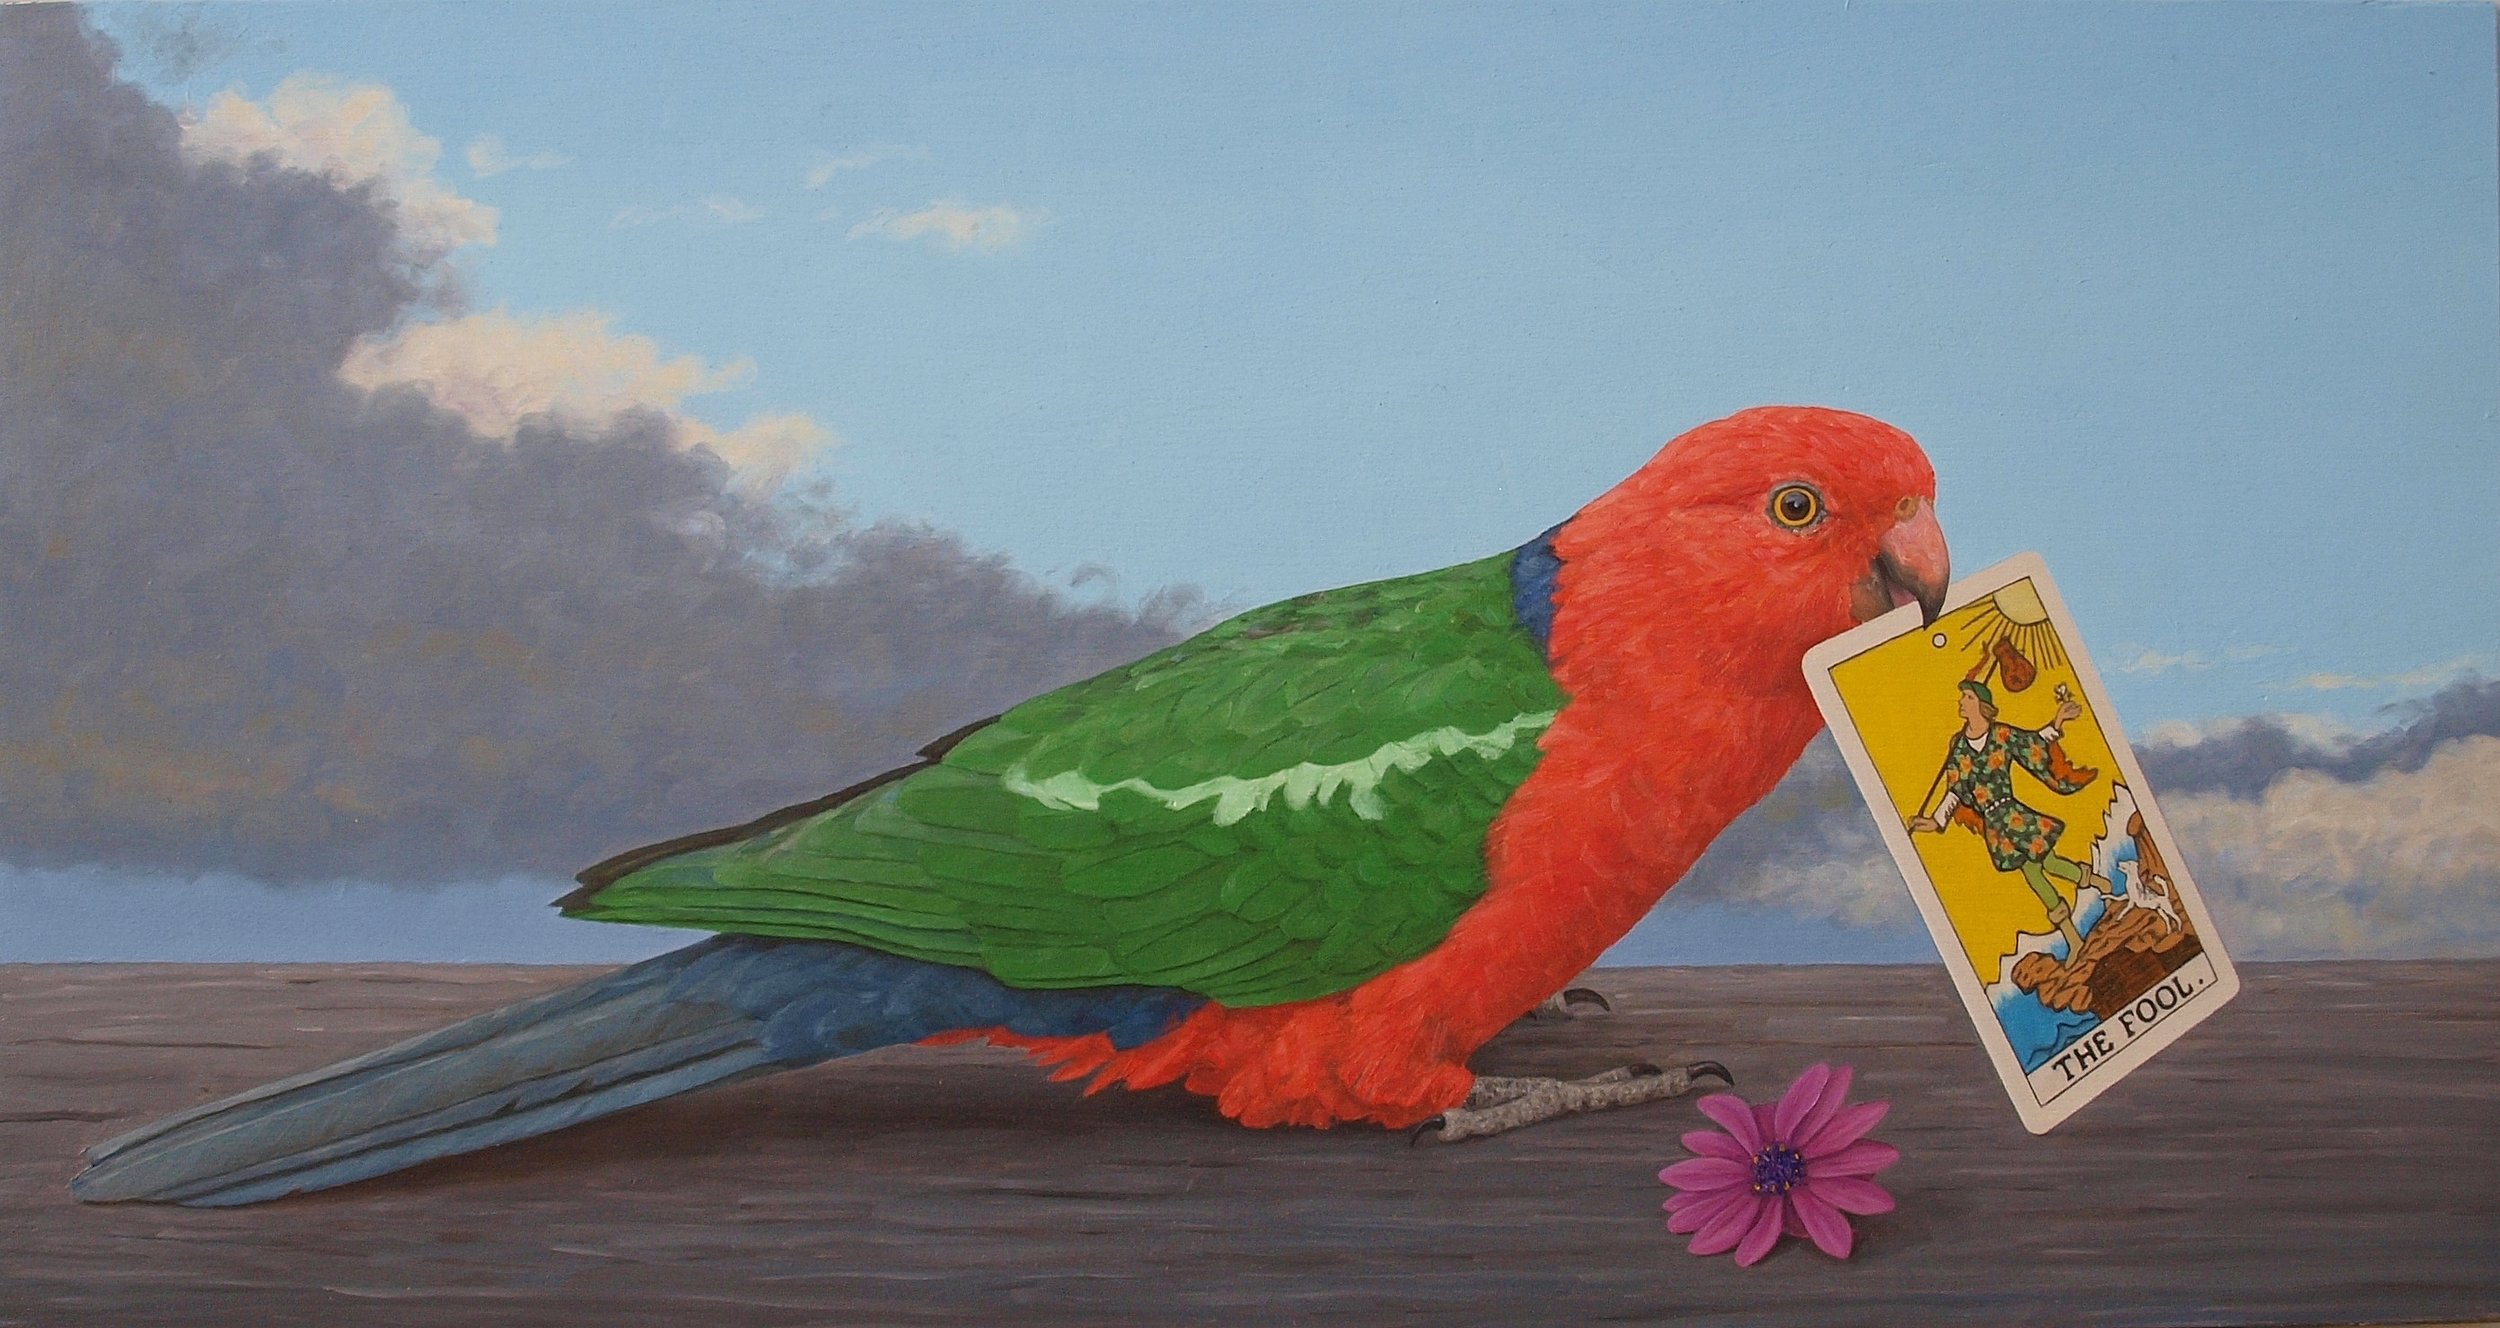 King Parrot and the Fool